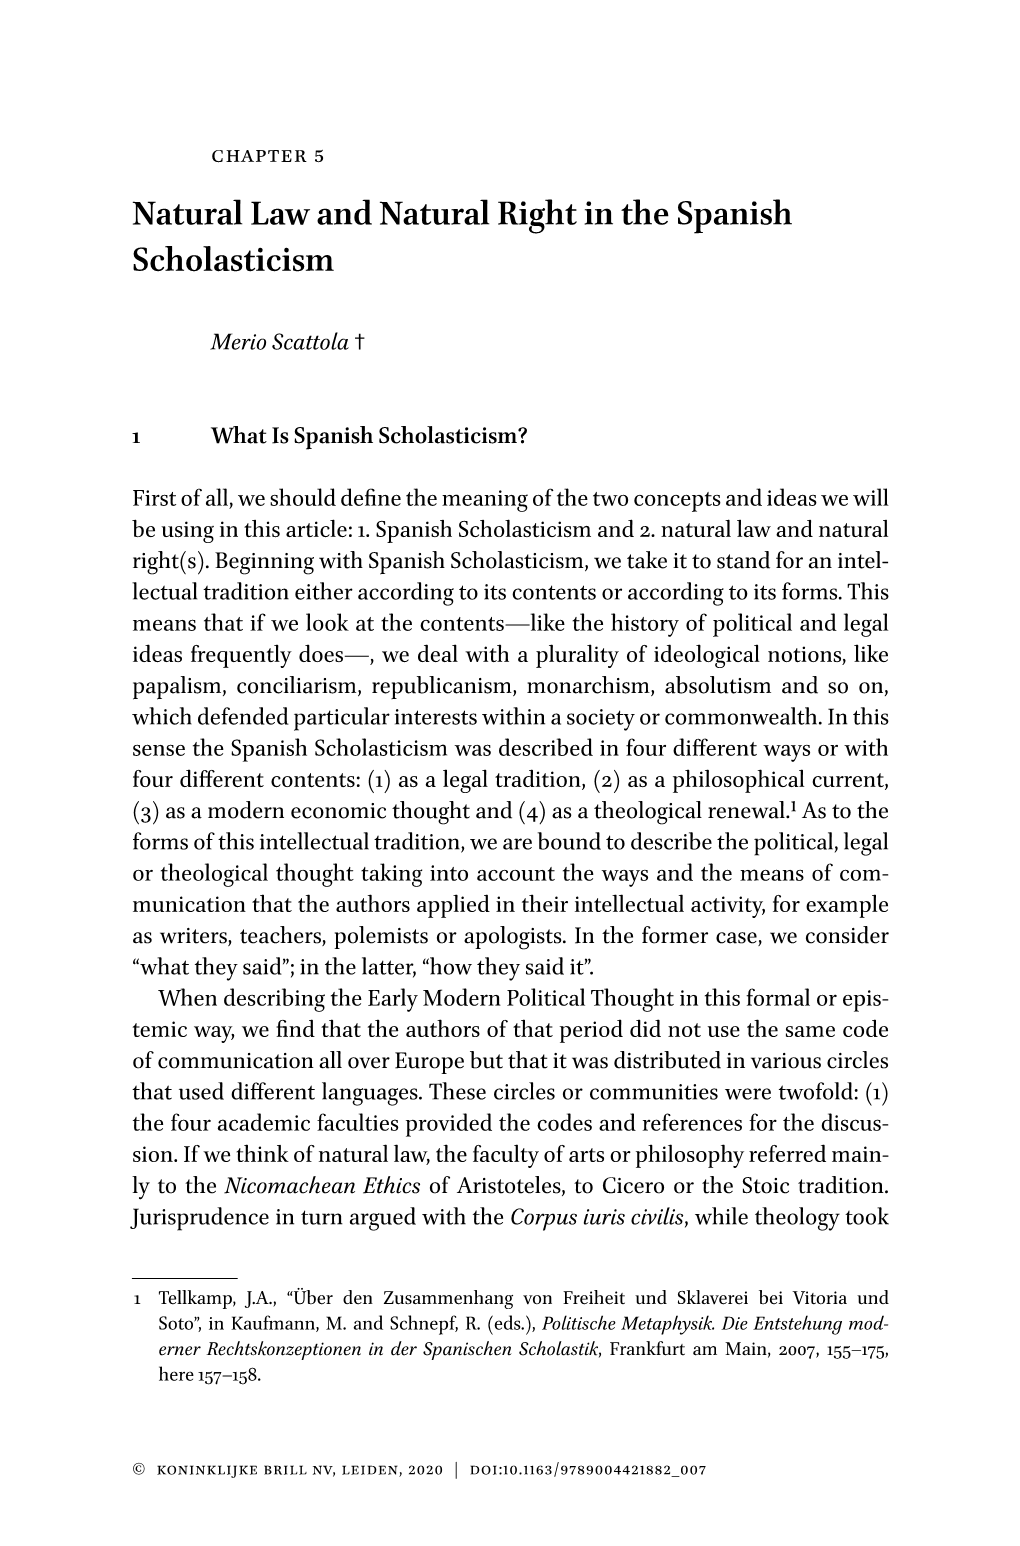 Natural Law and Natural Right in the Spanish Scholasticism